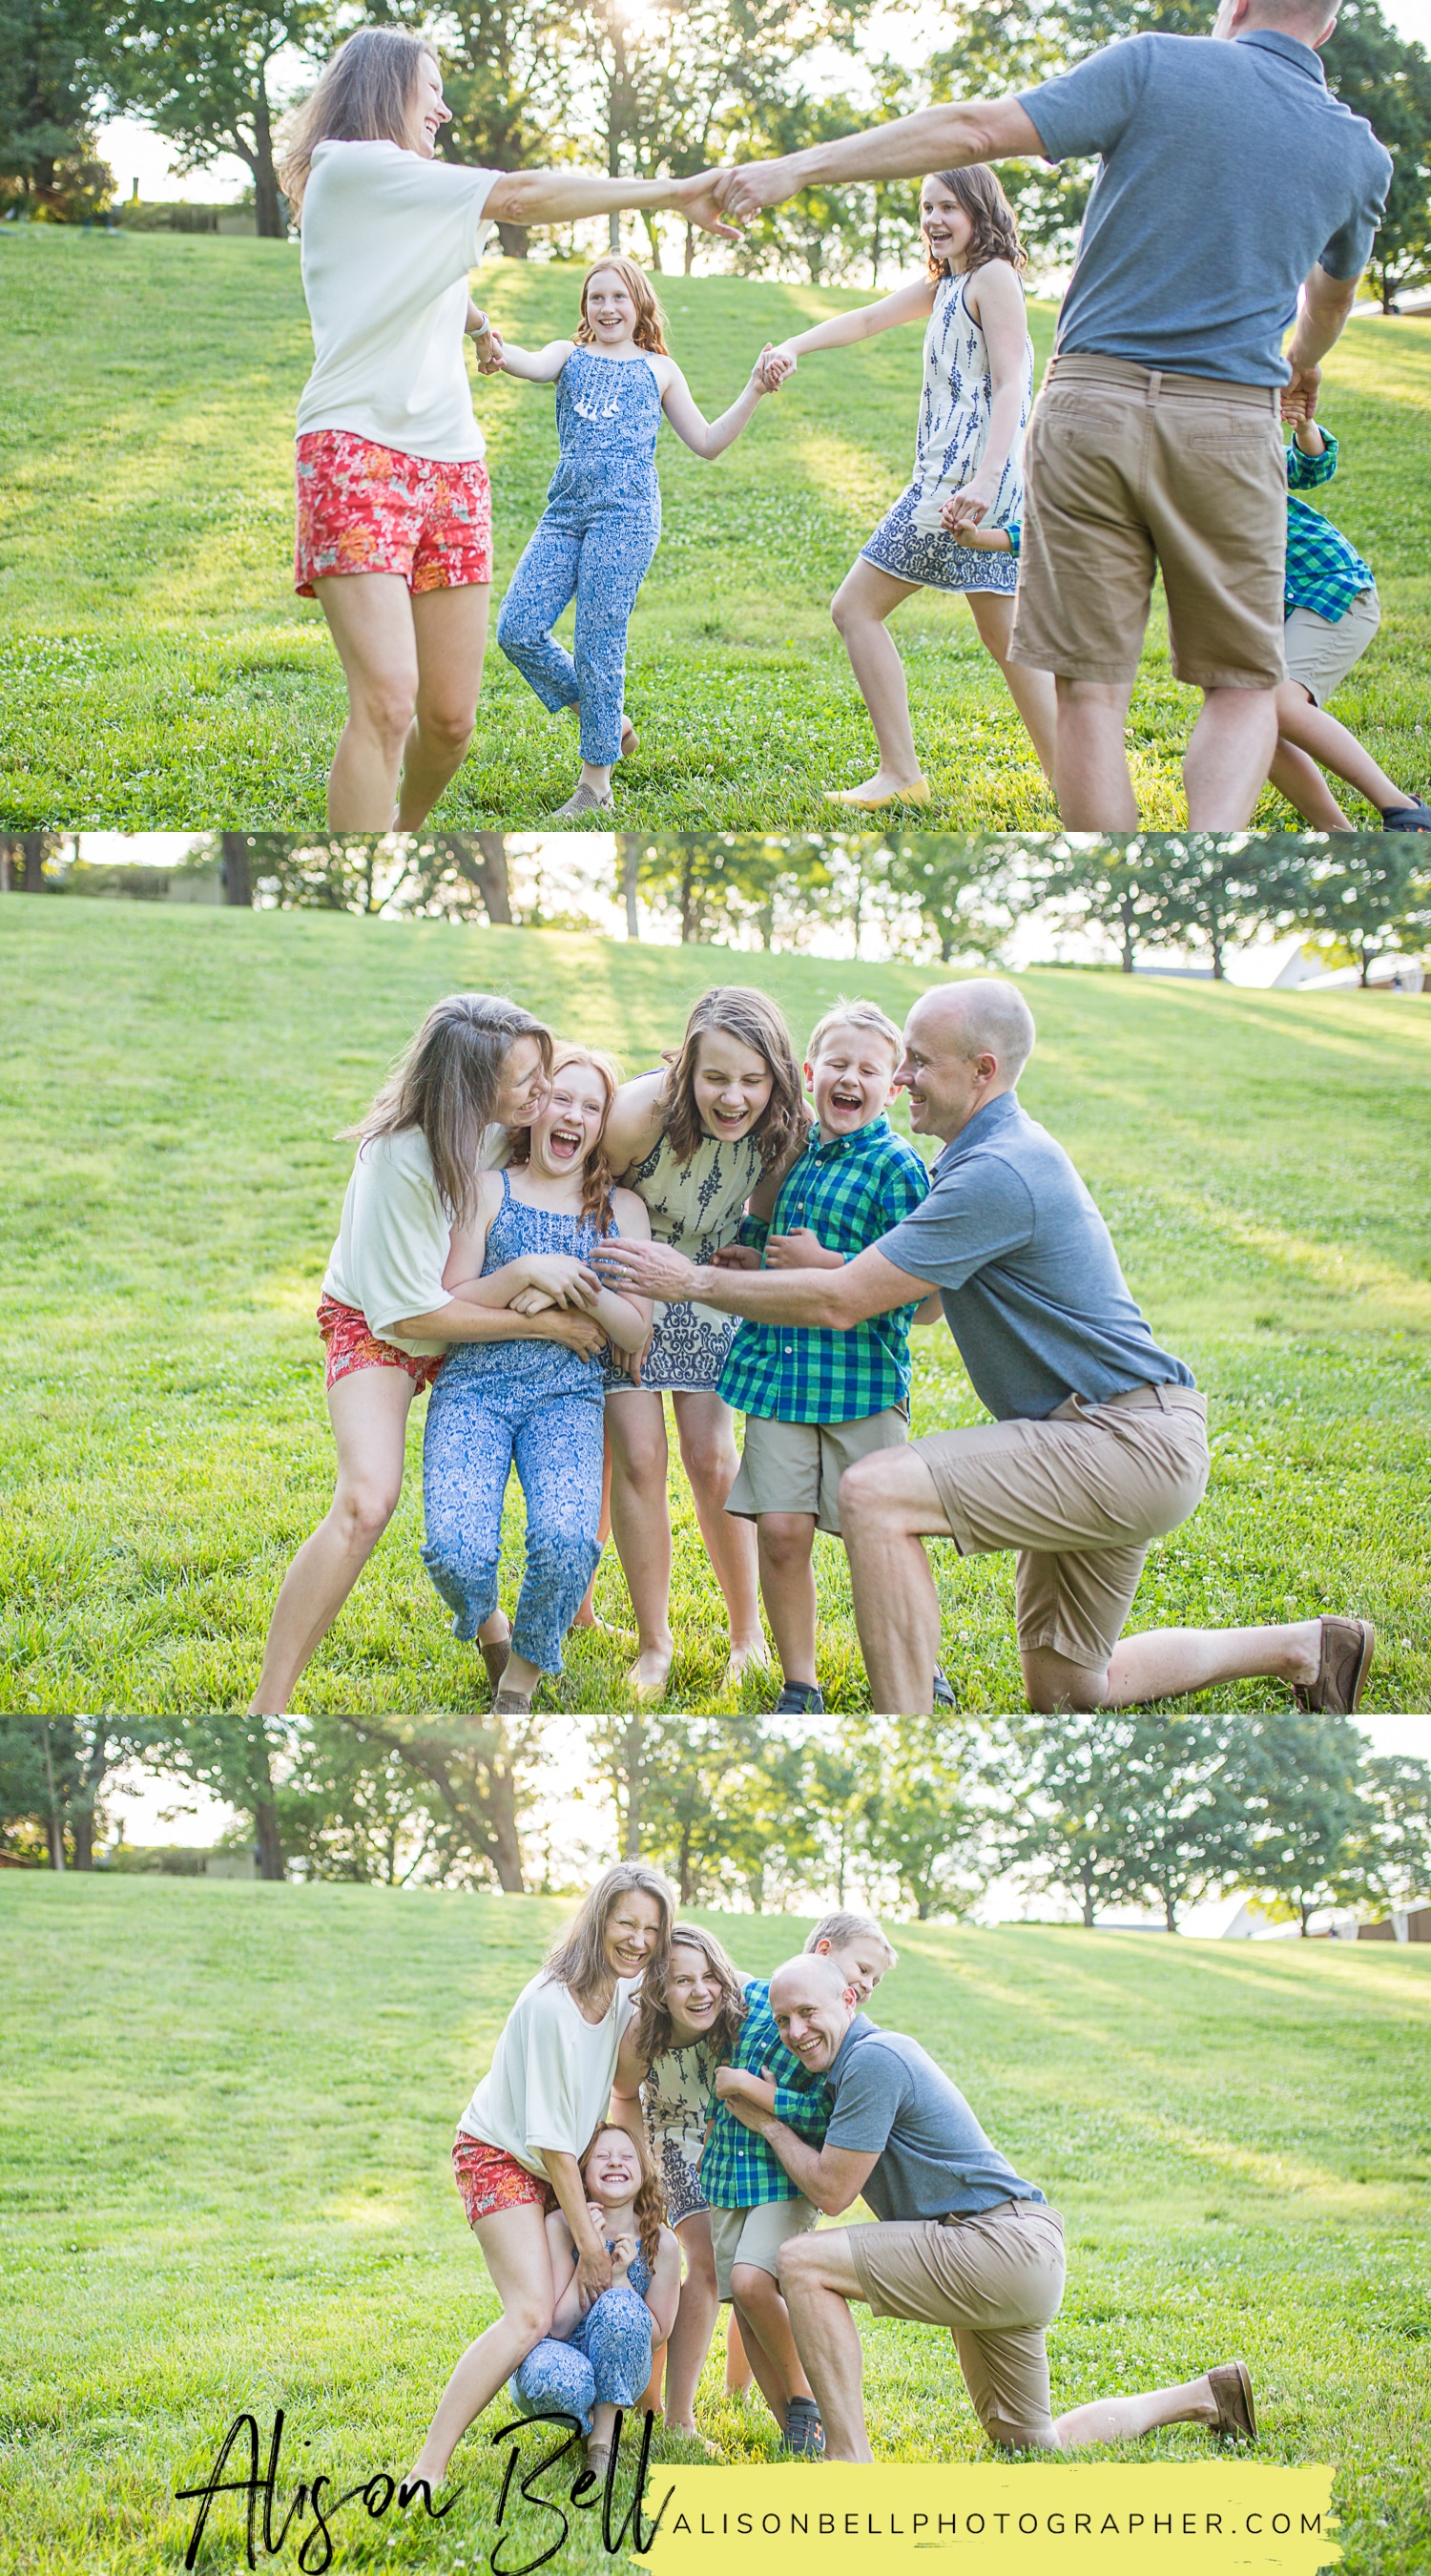 Family of 5 with older kids photo session at Wolf Trap National Park for the Performing Arts in Vienna, Virginia by Alison Bell Photographer, alisonbellphotographer.com